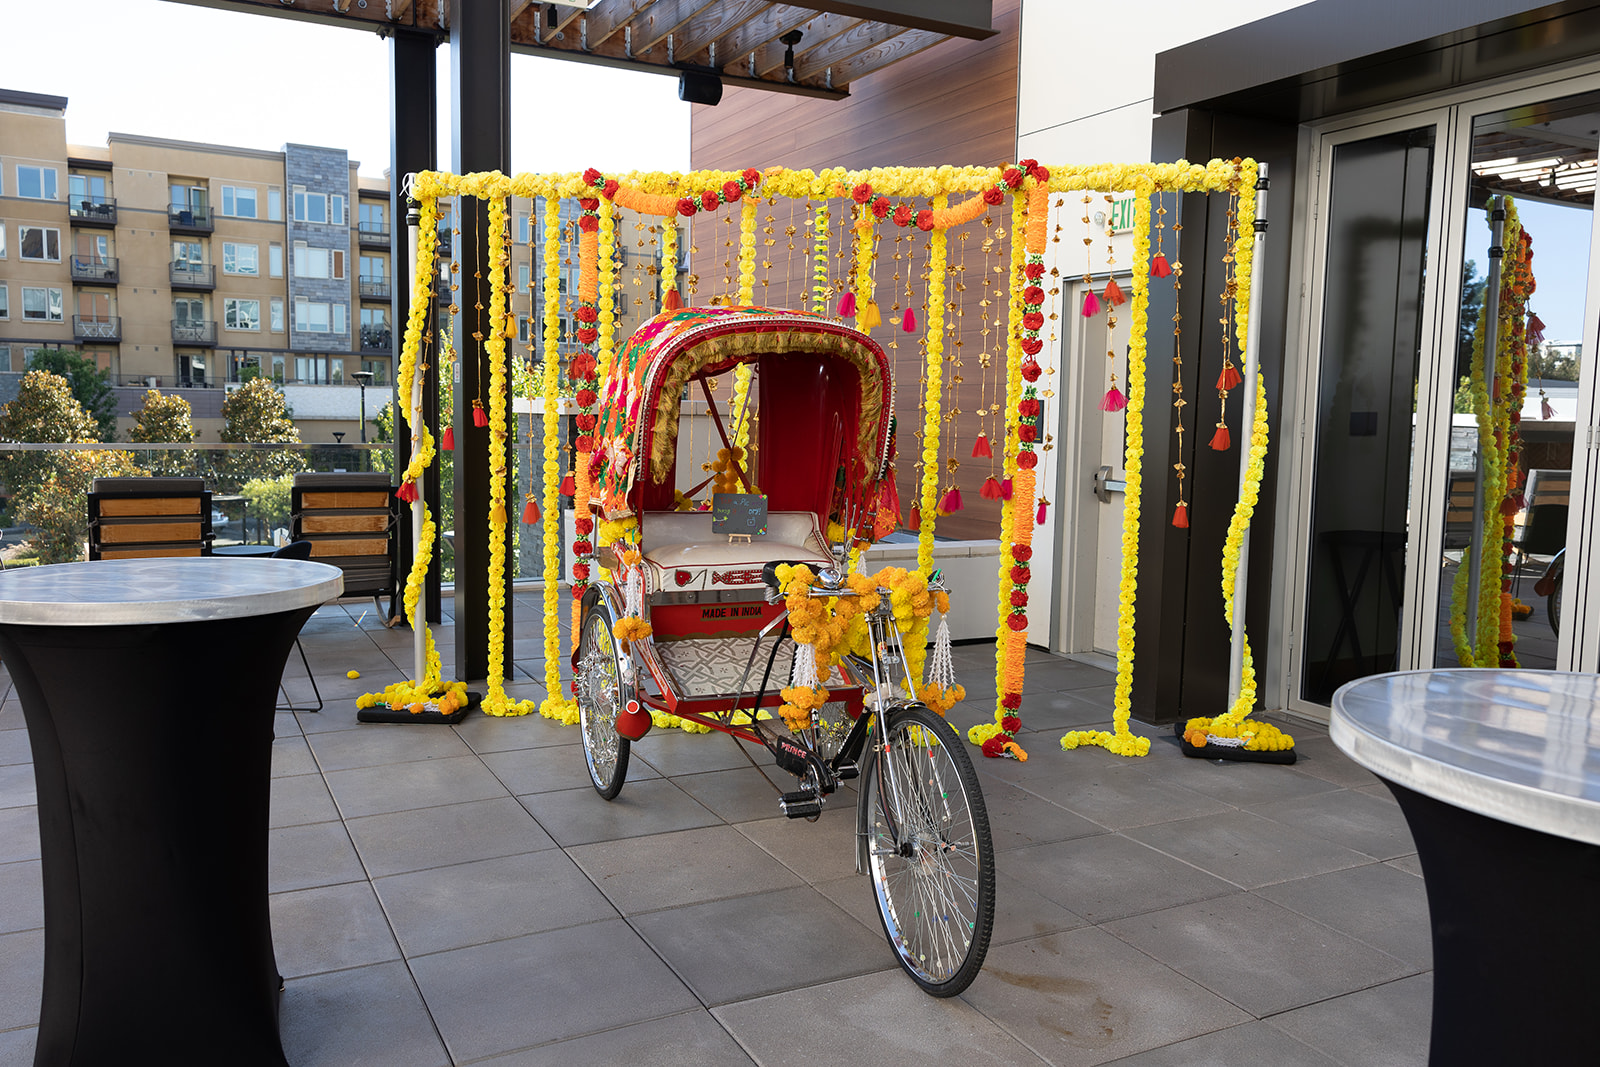 Bay Area Indian Wedding Venues, Hyatt Centric, which allowed the custom decoration of a bike taxi for photos.